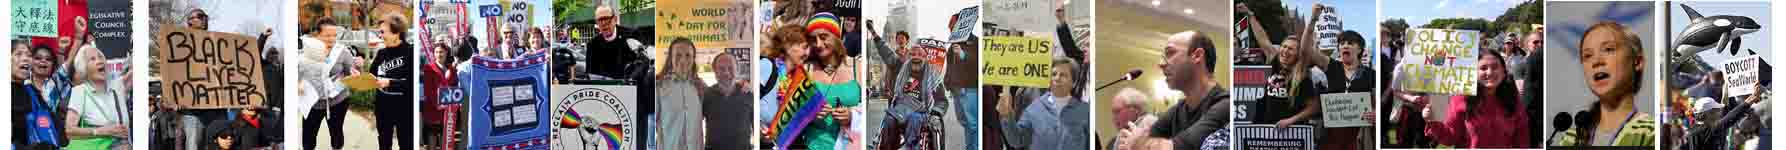 pictures of advocates show a crowd of protestors in Hong Kong, a woman with a shirt saying 'SOLD!' collecting signatures in a parking lot, a group in front of the US Capital with 'No Labels' banners, a black-and-white picture of a woman in a wheelchair in front of a bus, Stephan Sauerburger and Alex Hershaf in front of a sign saying 'world Day for Farm animals,' two women in front of a crowd smiling at eachother, holding a rainbow banner saying 'Pride.' a man in a wheelchair moving with a crowd holding signs, he is grinning triumphantly and raising his fist, a woman in a crowd holding up a sign 'They are us, We are One,' a man giving testimony to a legislature, a crowd protesting animal lab research, a young girl in a crowd smiles and holds a sign 'Policy change, not climate change'.